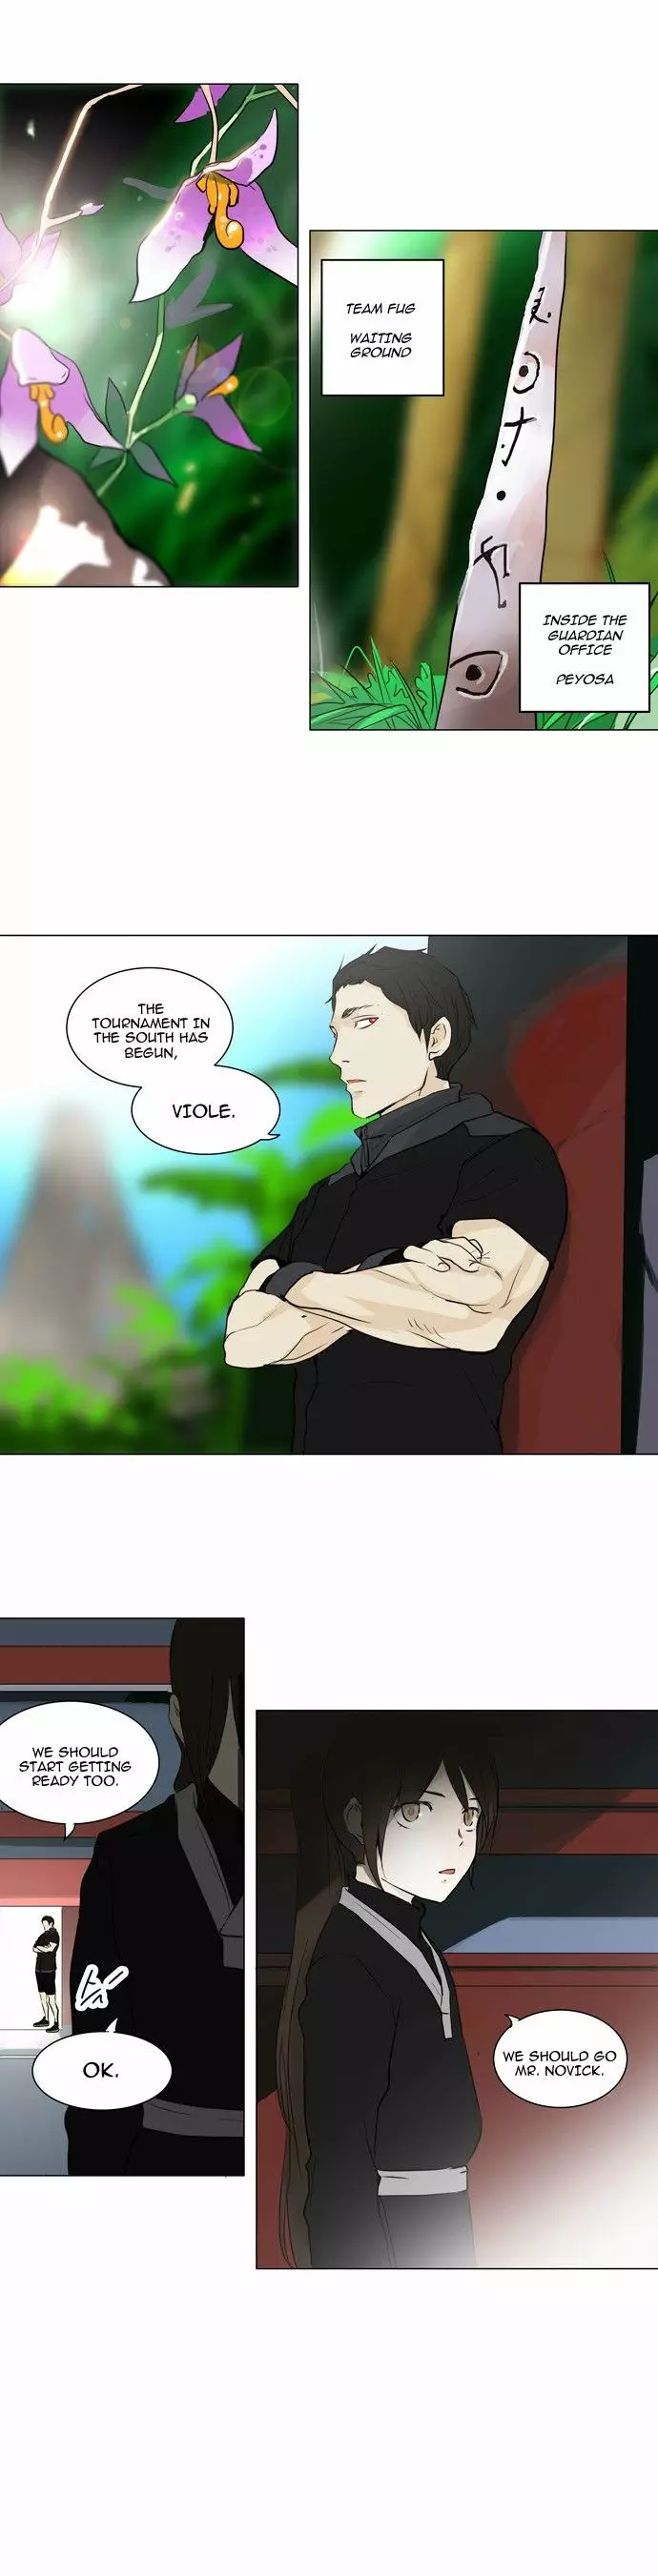 Tower of God - 161 page p_00026